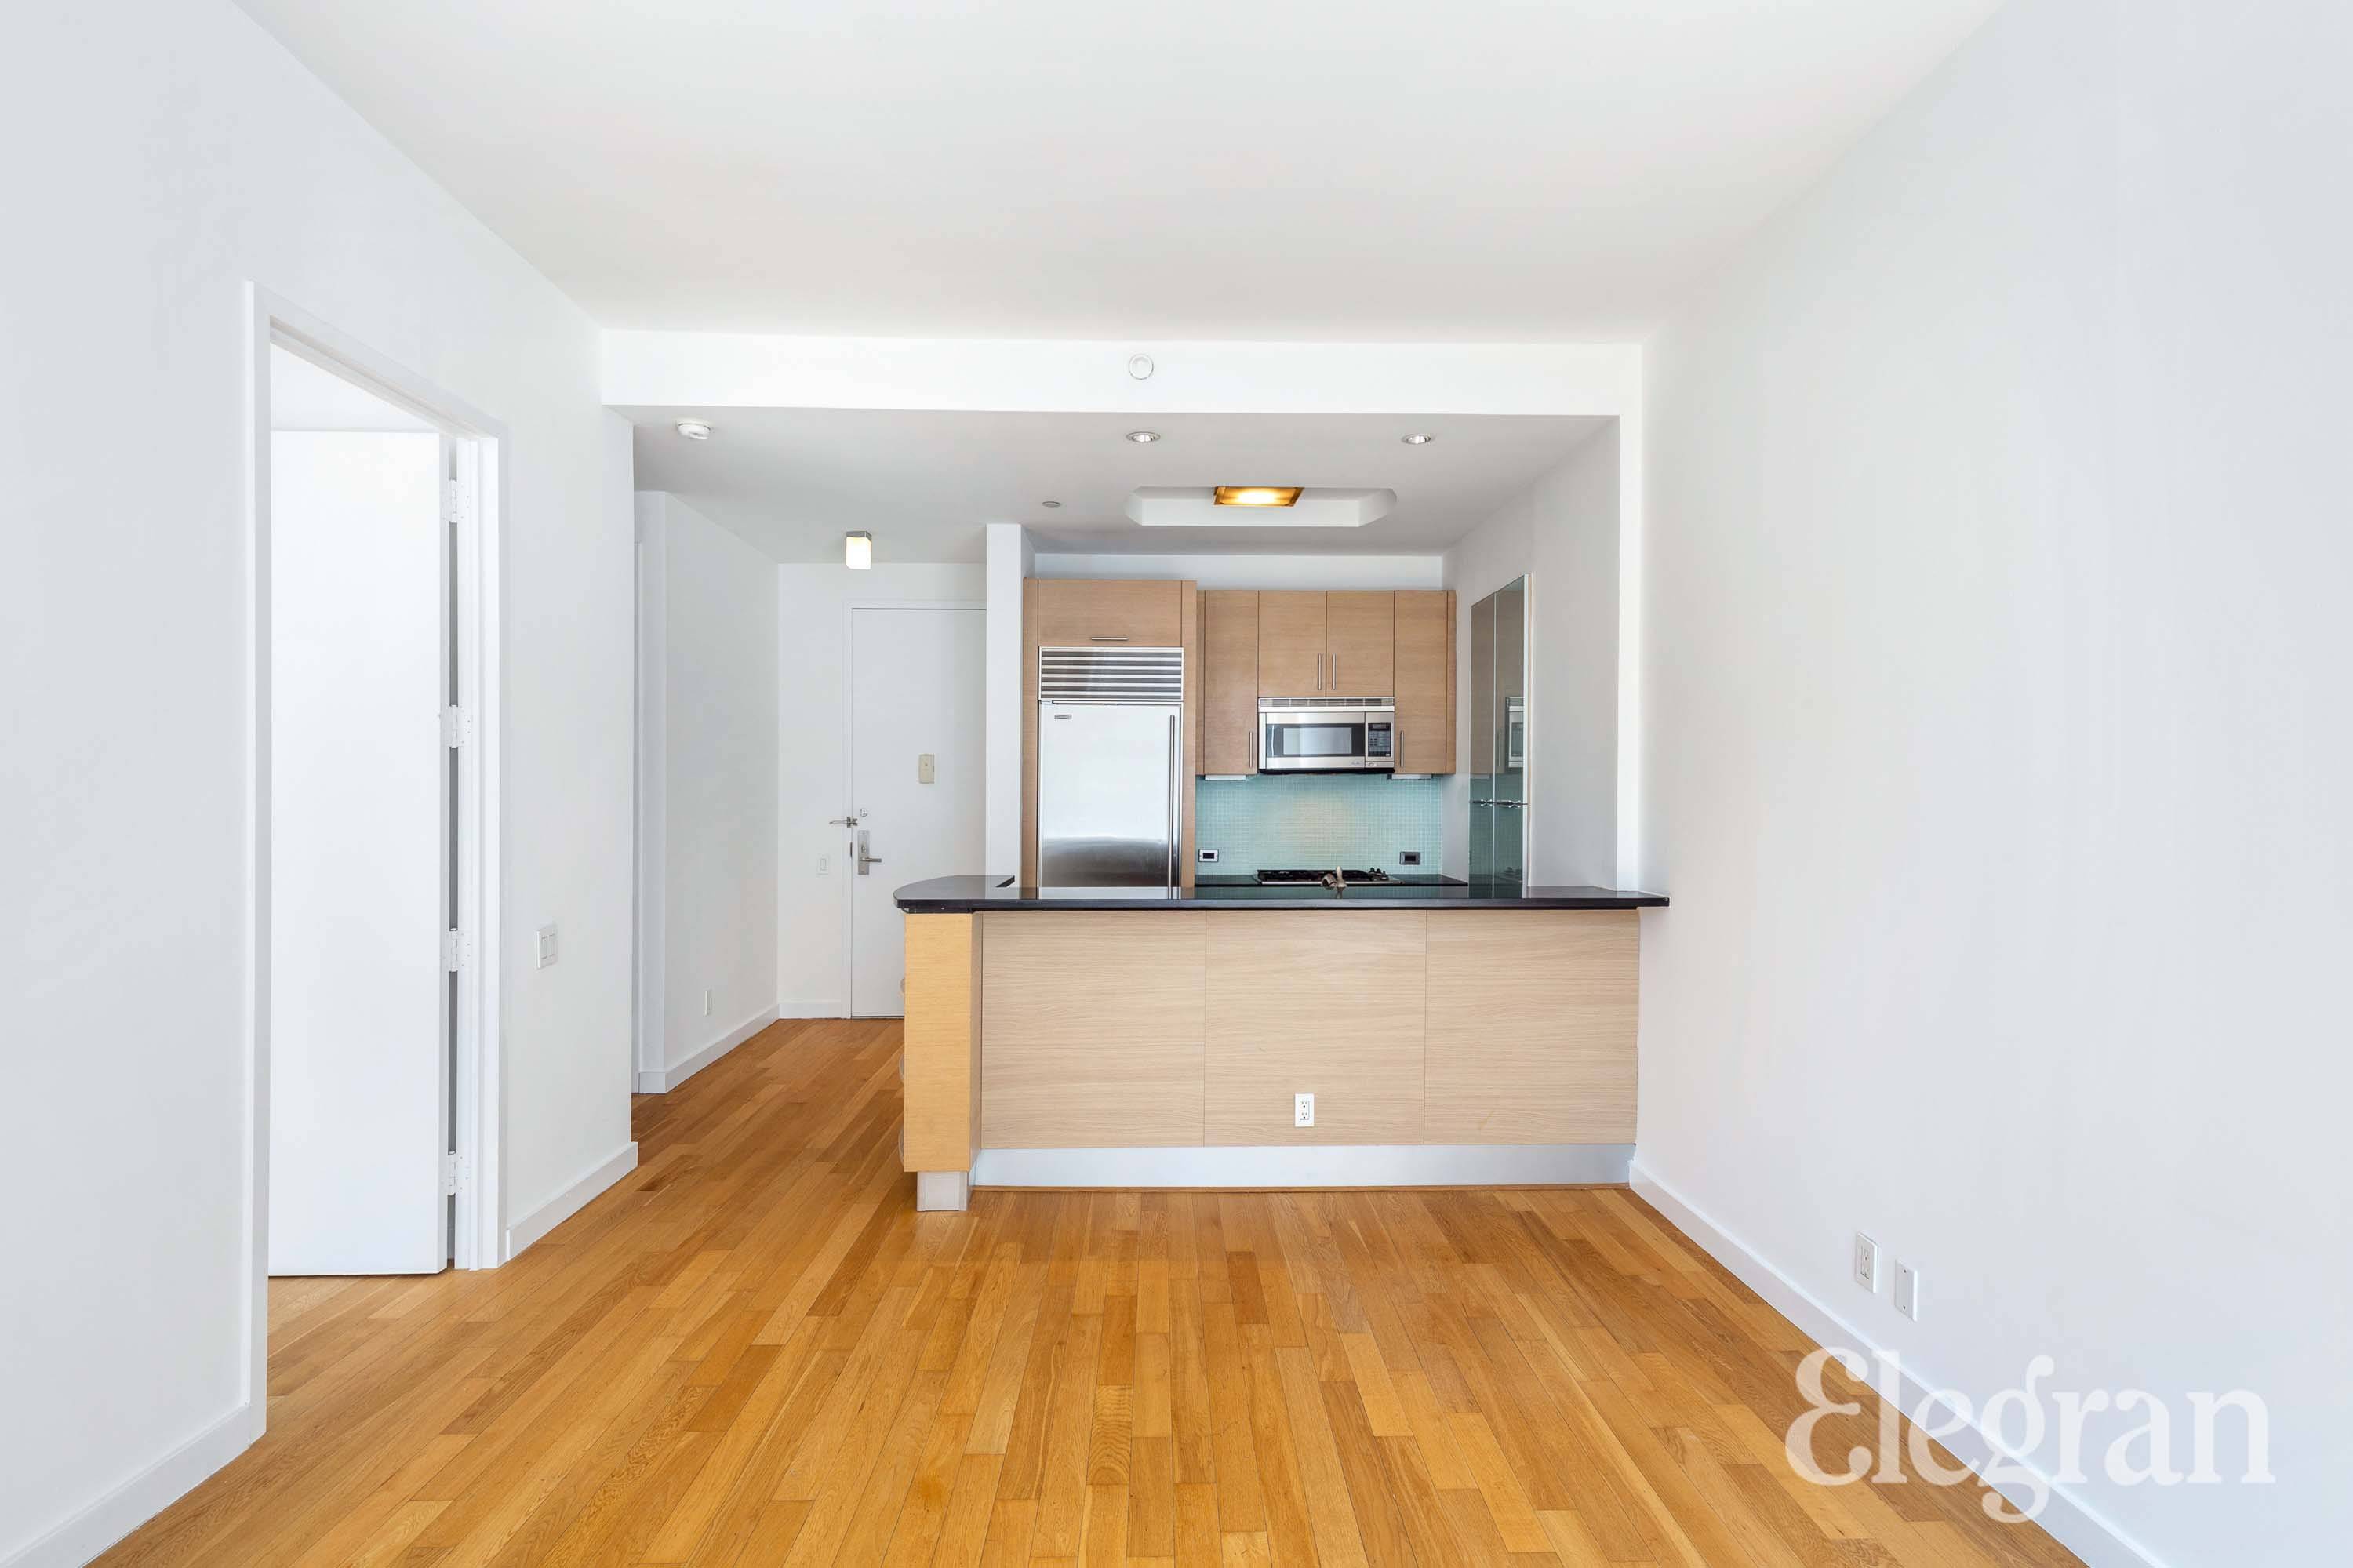 Spacious, luxurious 1 bed, 1 bath apartment located on one of Manhattan s most prestigious blocks, Fifth Avenue.